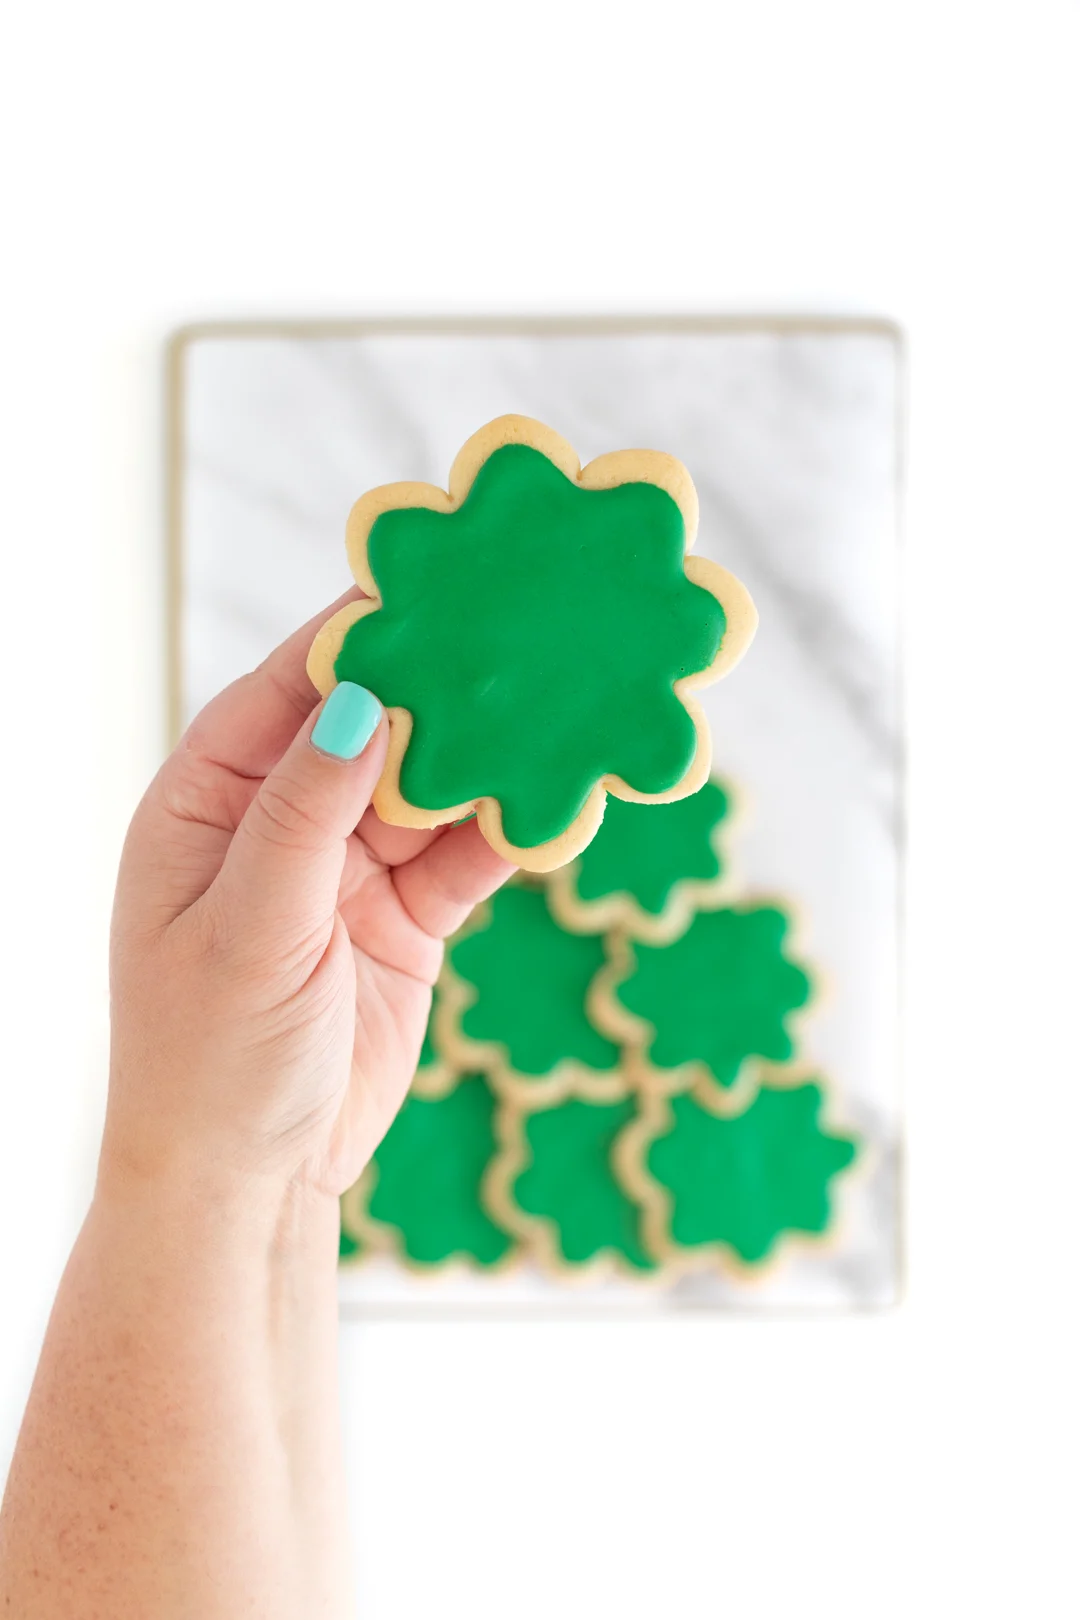 overhead photo of a woman 's hand holding a green frosted flower shaped cookie